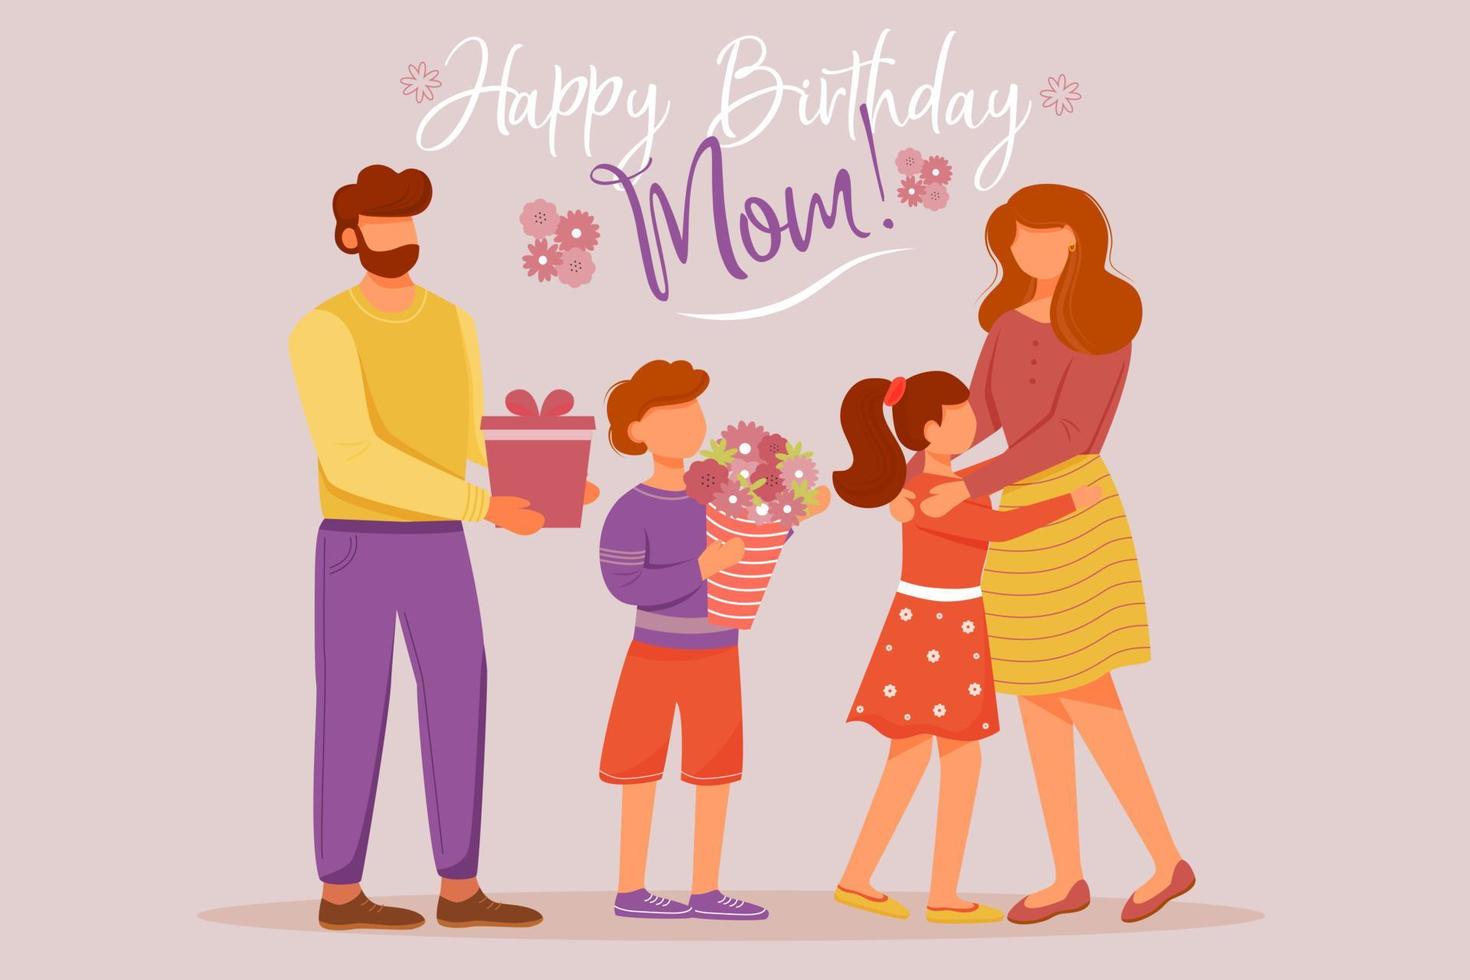 Happy birthday mom greeting card flat vector template. Father, children congratulate mother. Postcard, invitation design layout. Poster, banner, print with cartoon characters and lettering